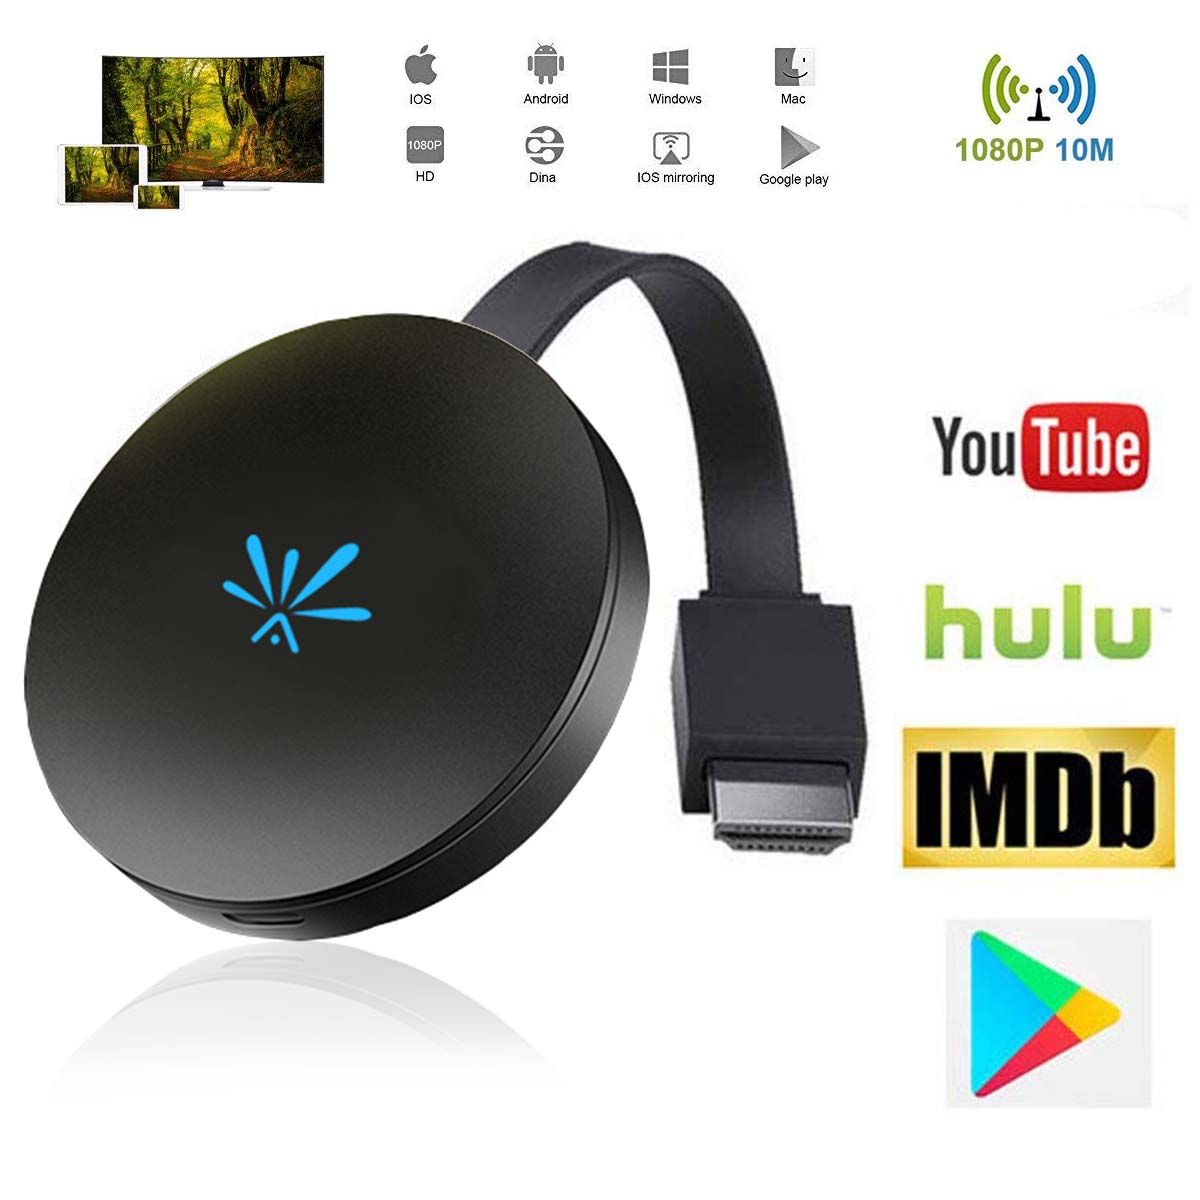 SOONHUA TV Stick Video WiFi Display HD Screen Mirroring TV Wireless Dongle Receiver Google With HDMI For Chromecast 2 - Price history & Review | AliExpress Seller - SH Western Store | Alitools.io